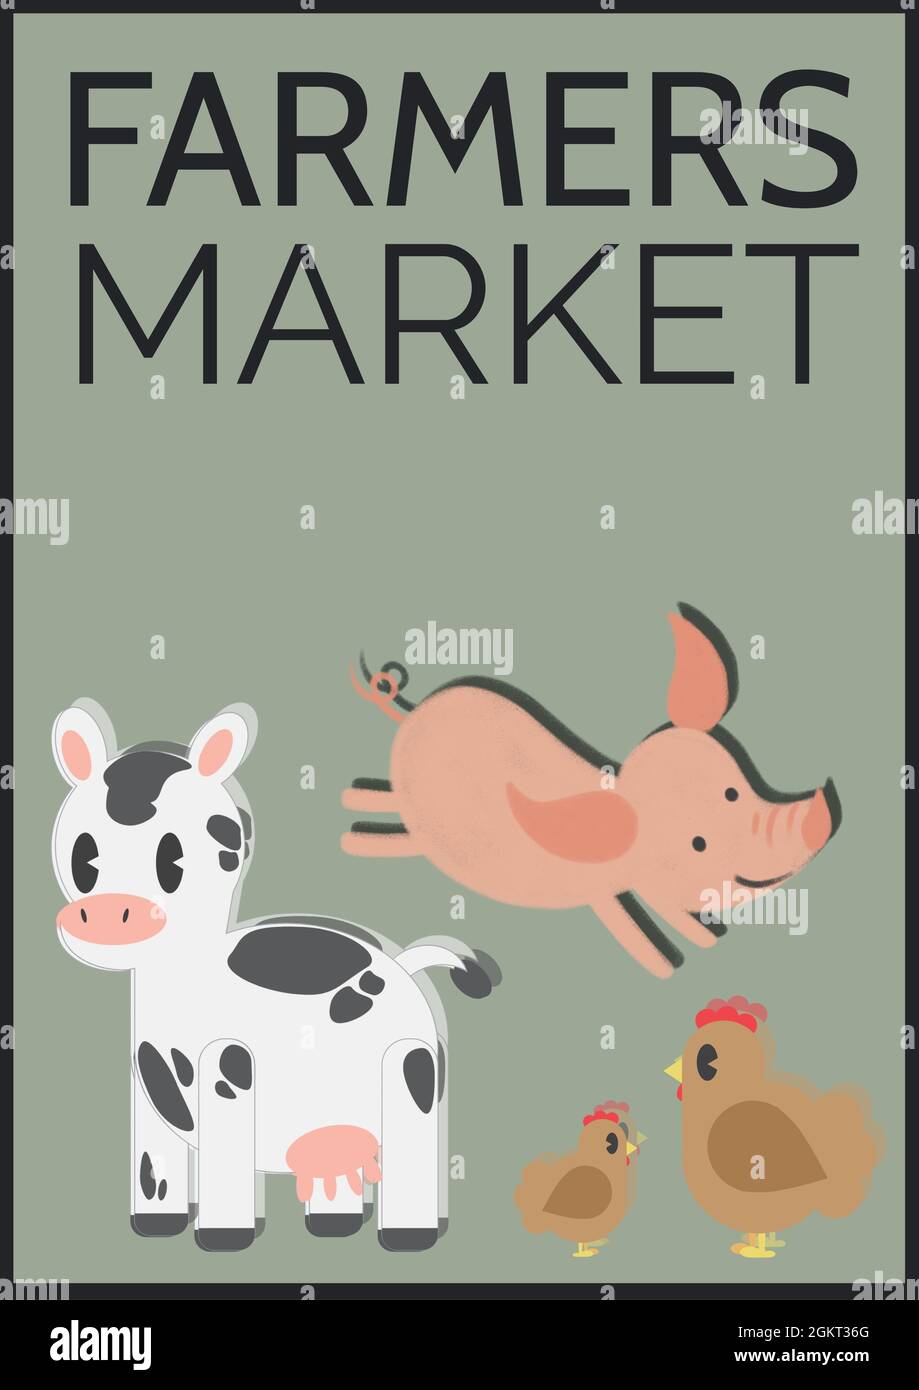 Farmers market text over cow, pig and chicken icons on green background Stock Photo